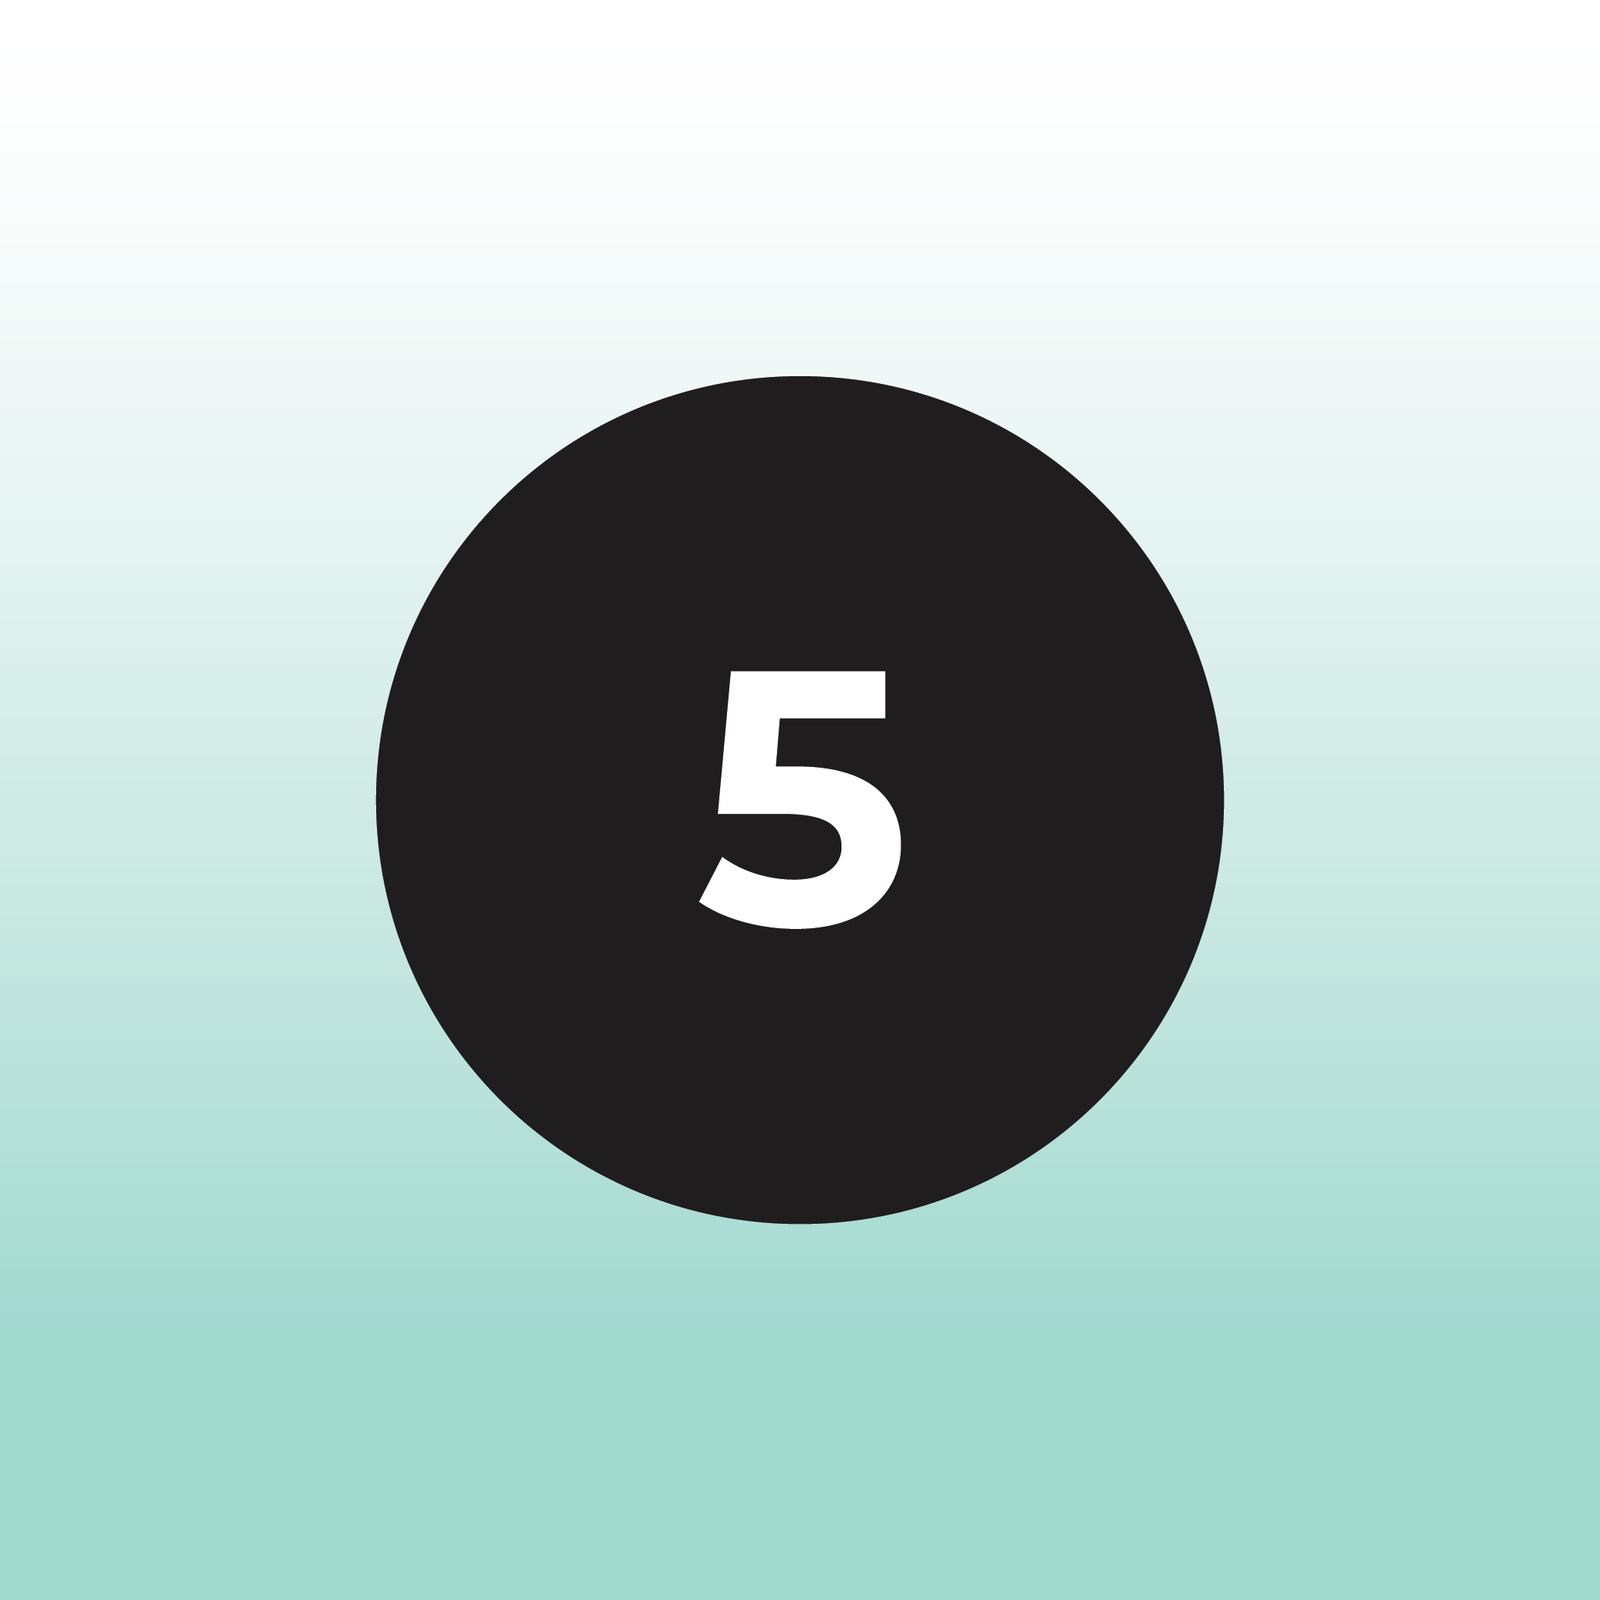 teal gradient background with a black circle and the number 5 in white in the center